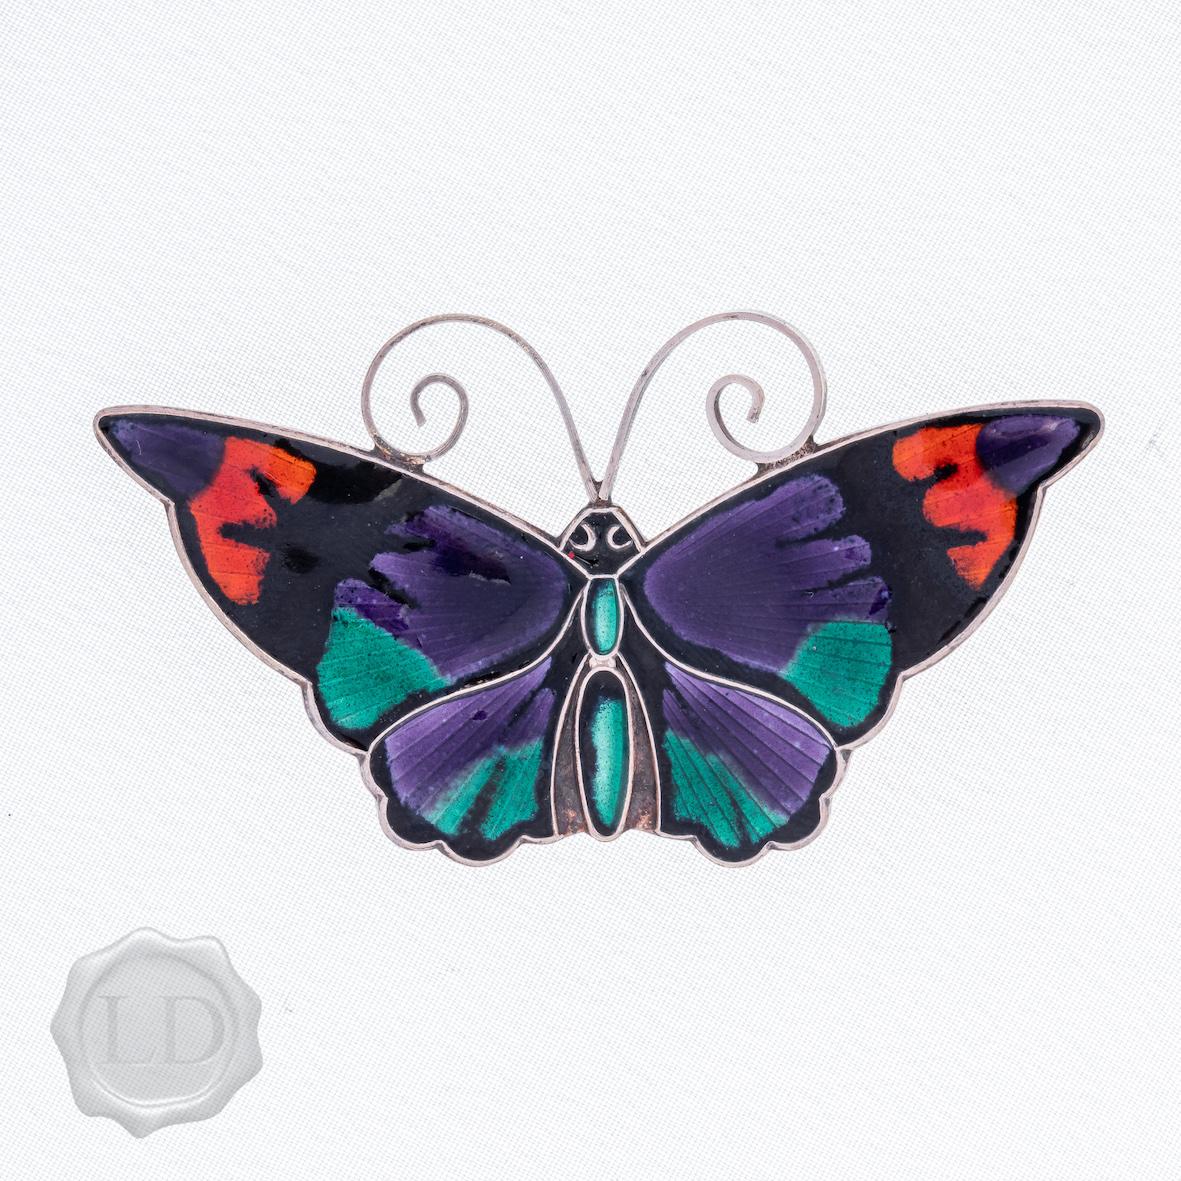 Vintage 55mm multi-colour guilloche butterfly brooch